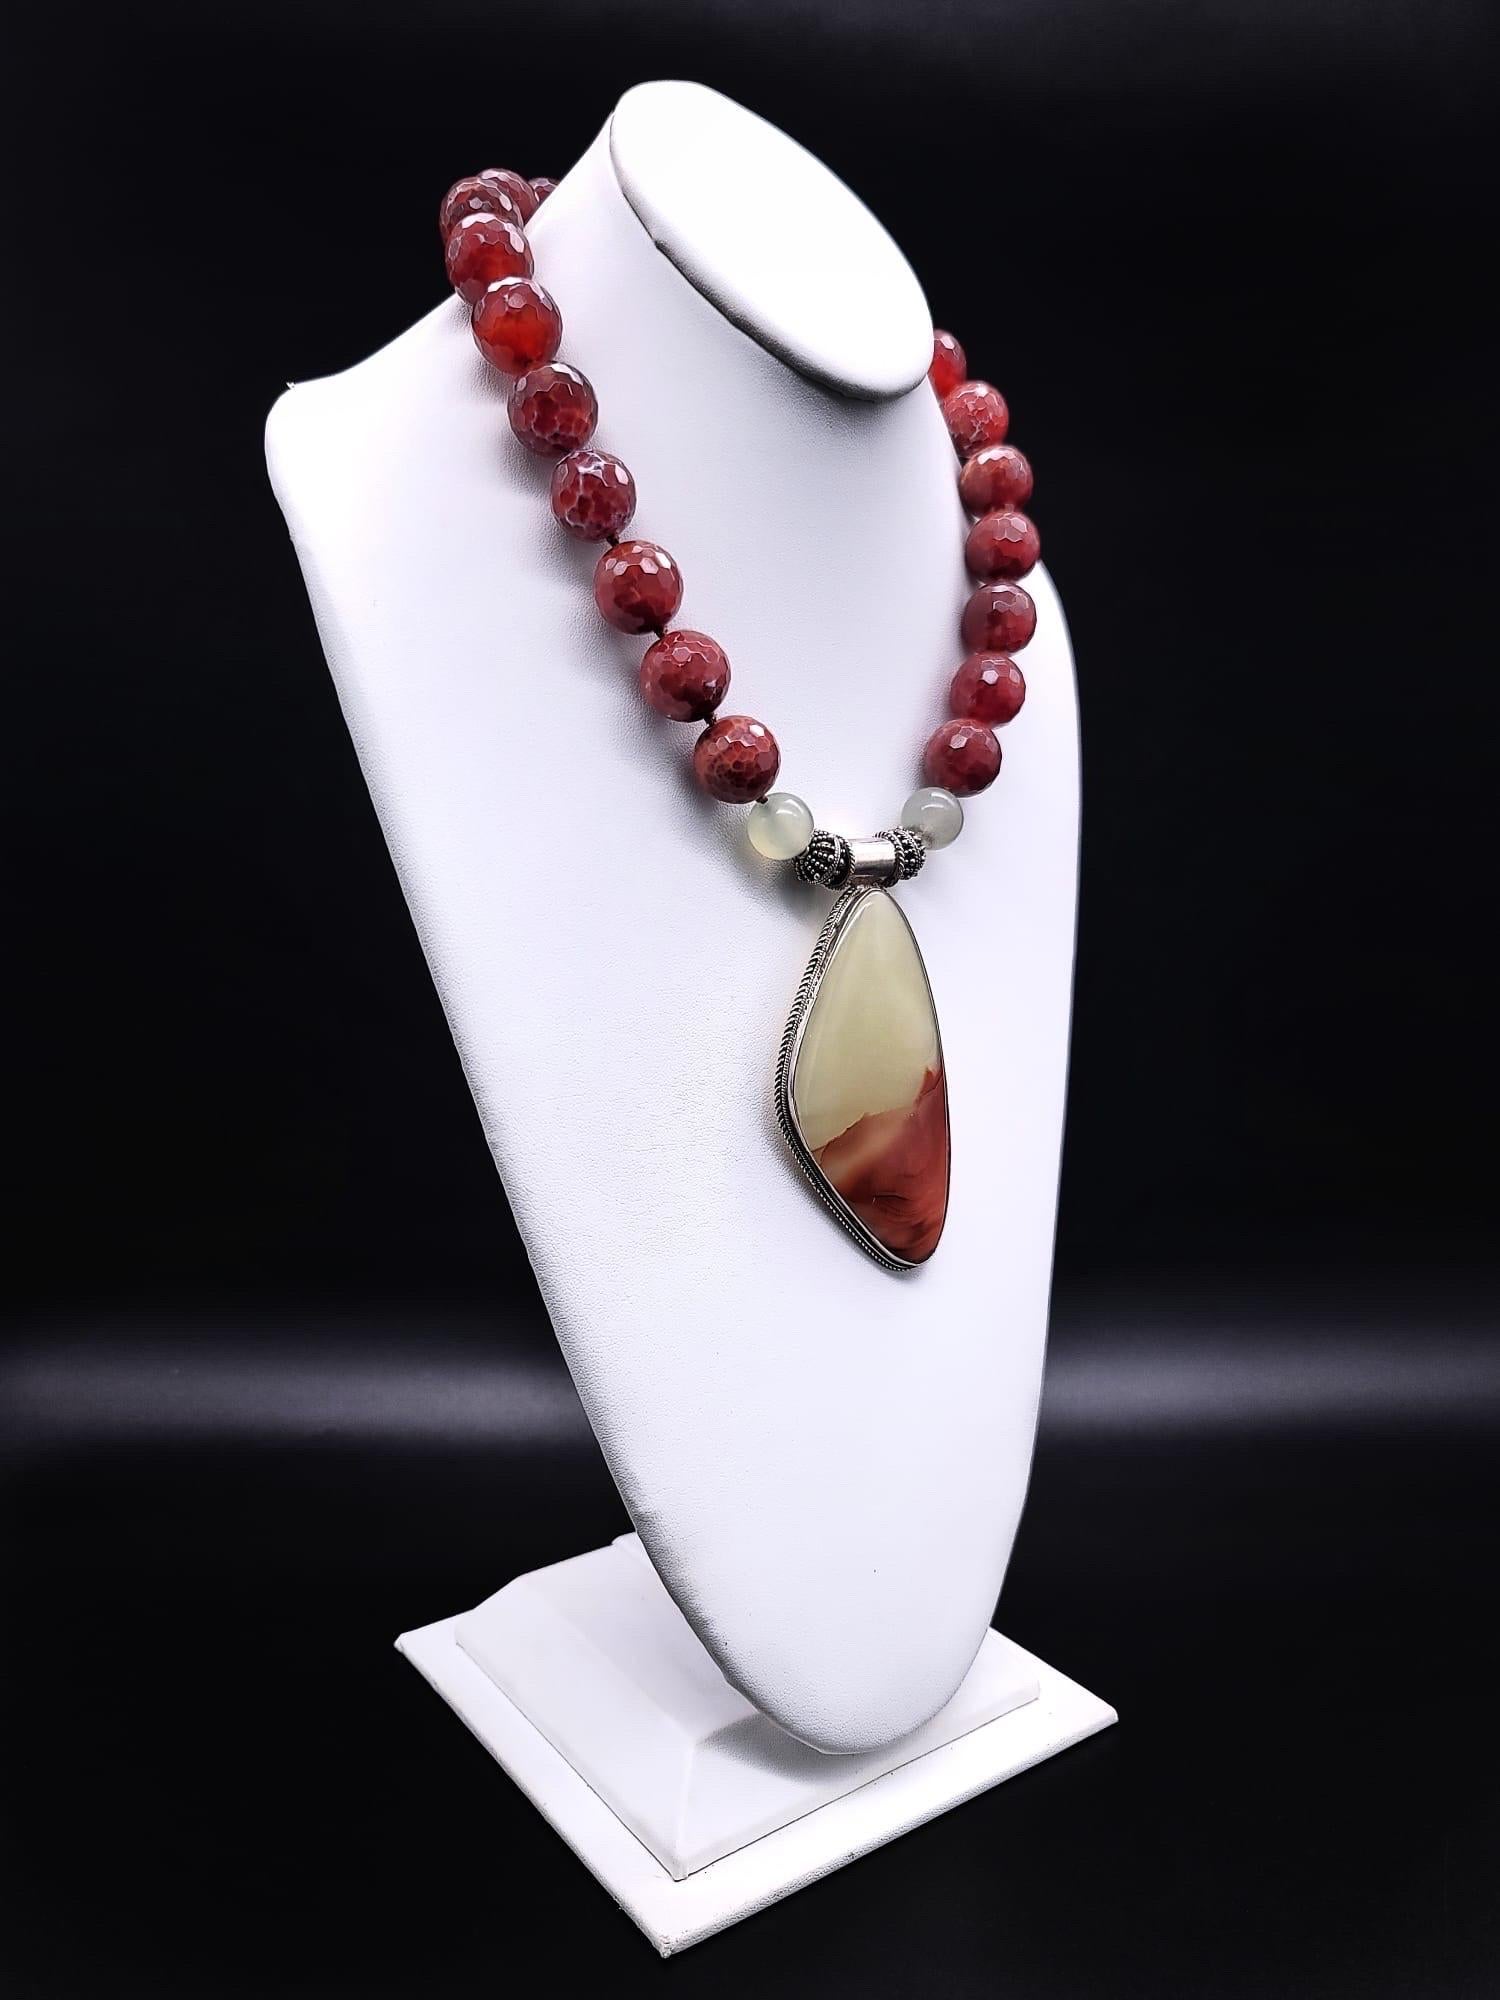 One-of-a-Kind
Show-stopping pale green onyx shaded to deep rust, mimicking a mountain range pendant. The pendant is suspended from equally interesting faceted Mexican fire beads. The fittings are sterling silver.
The clasp mounted in sterling silver